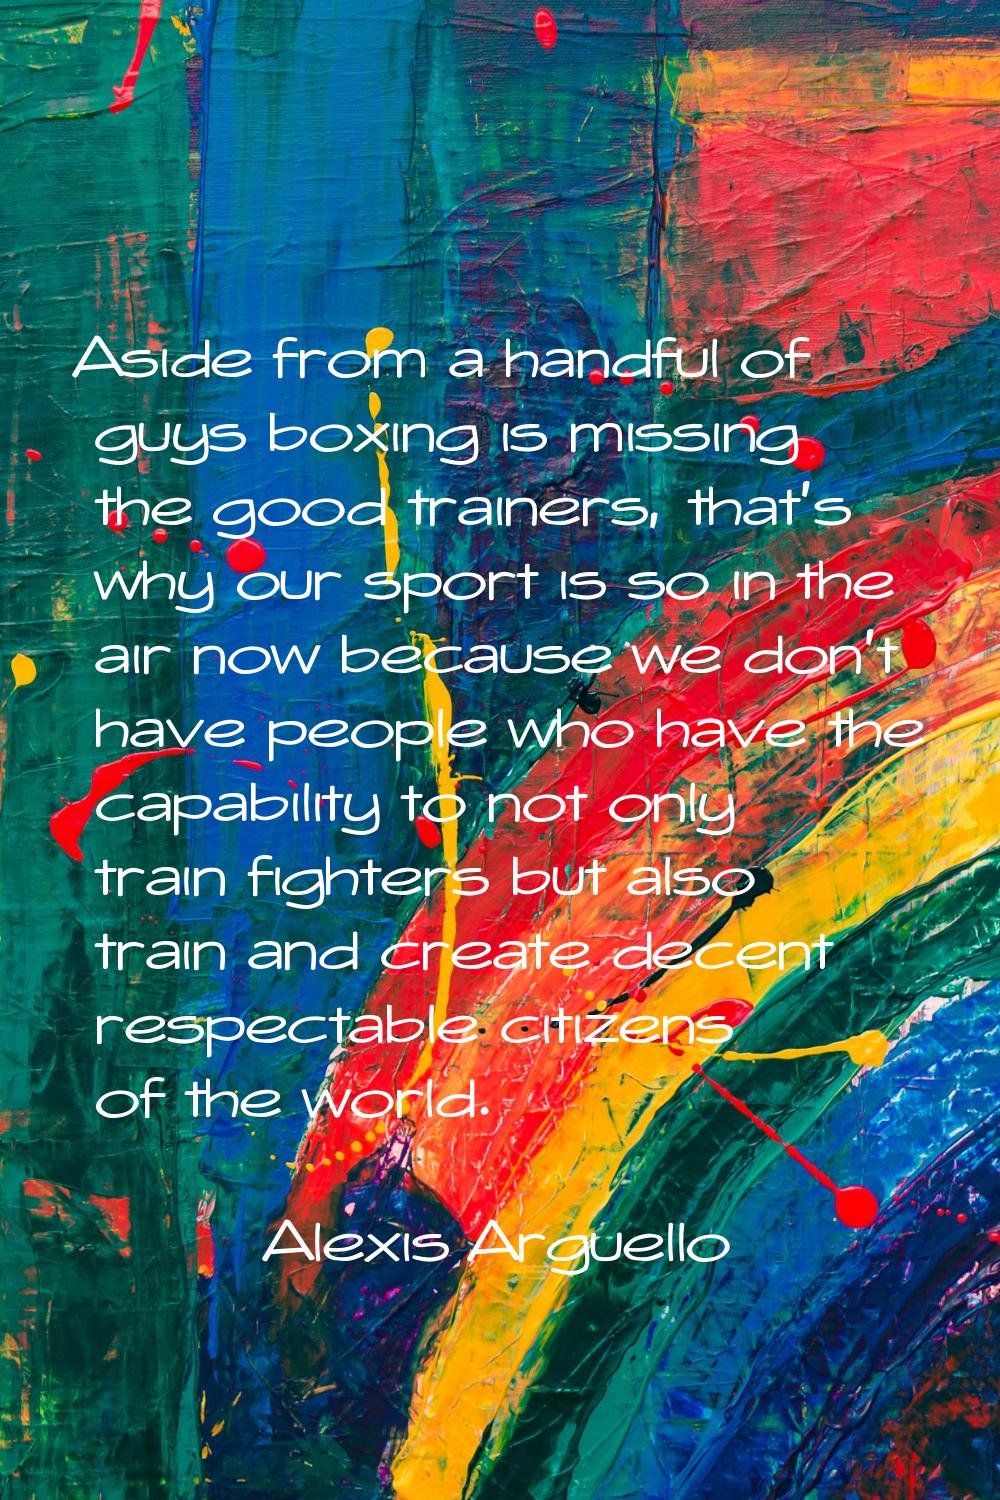 Aside from a handful of guys boxing is missing the good trainers, that's why our sport is so in the